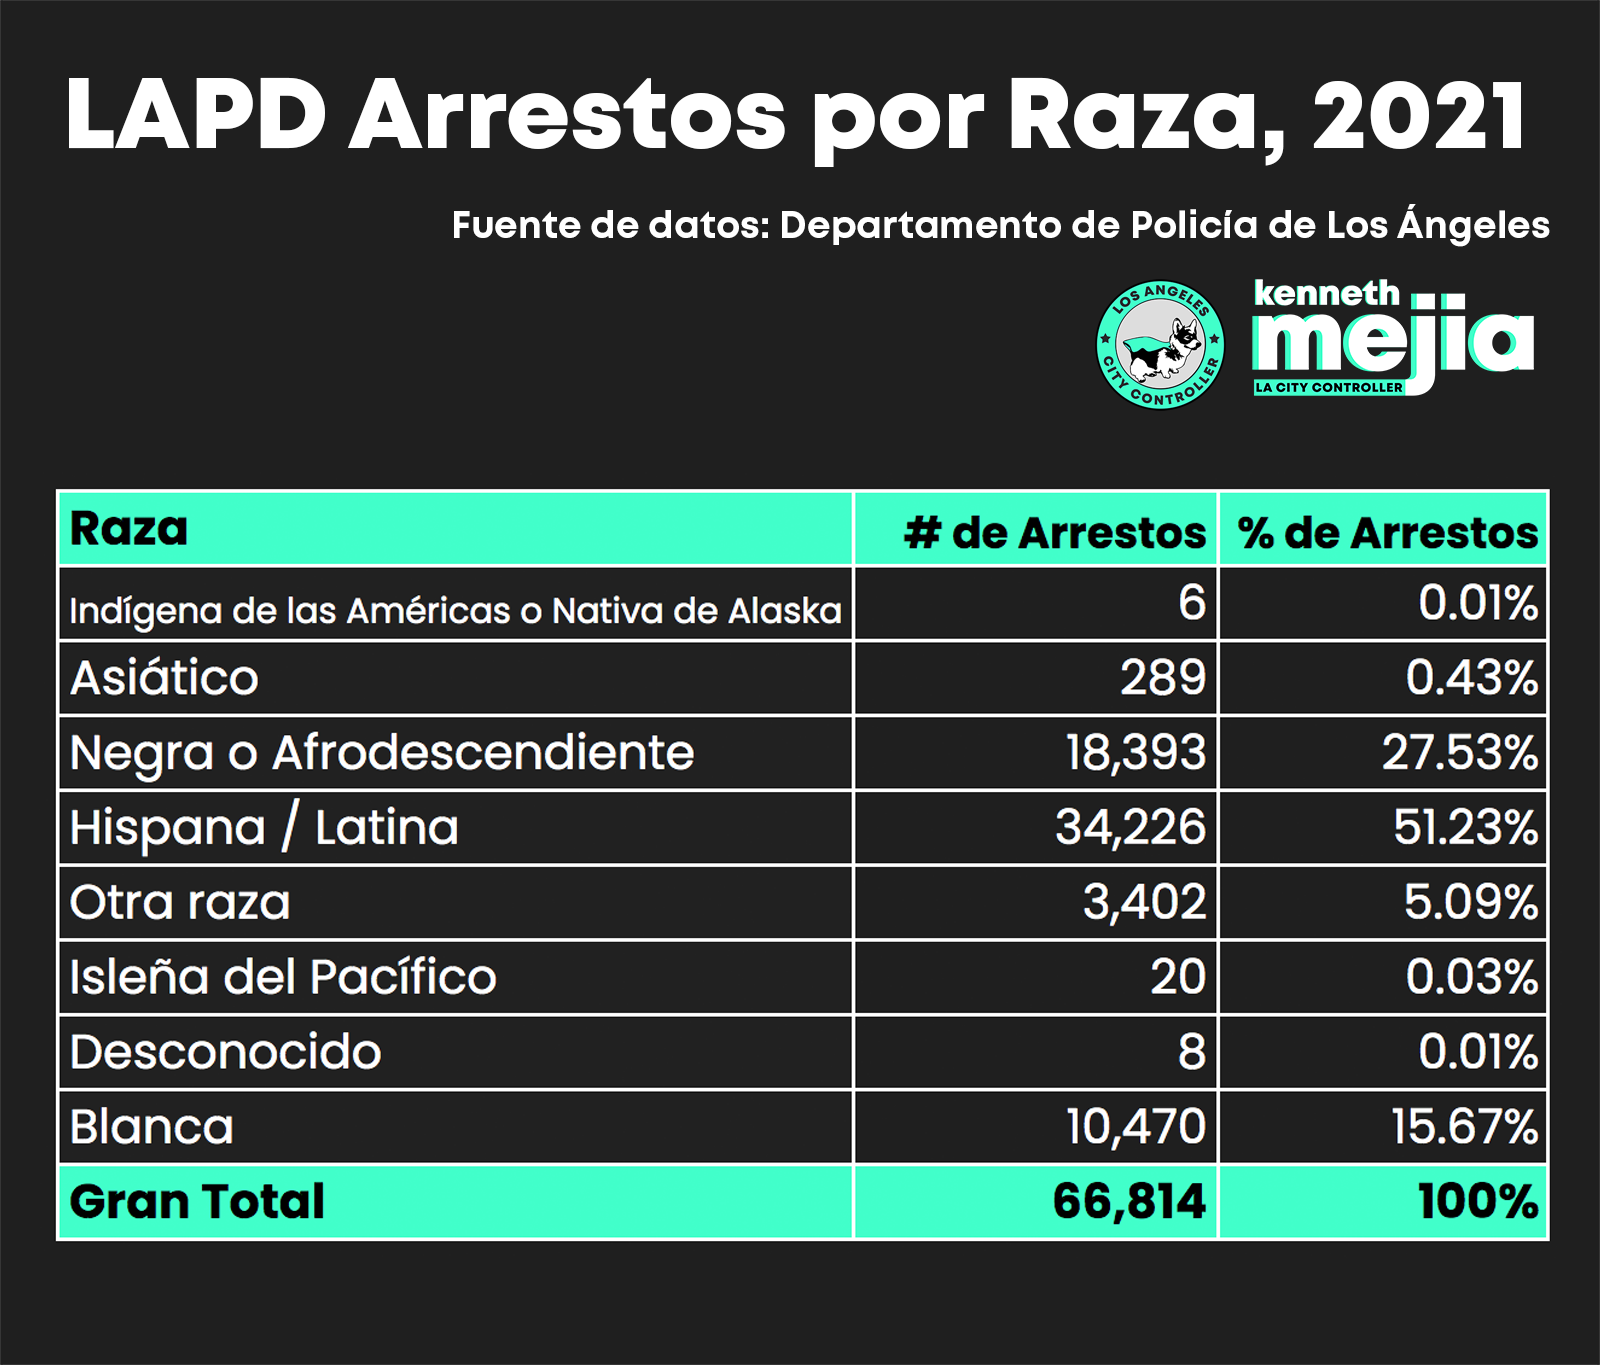 A bar chart of LAPD Arrests by Council District, 2021. There are still fewer arrests overall compared to 2019. There are 15 Council Districts. Council Districts 8 and 14 have the highest number of arrests, at around 6,000 arrests, and are also fairly close in number of arrests to districts 9, and 11 which are also close to 6,000 arrests. CDs 1, 6, and 13 each have around 5,000 arrests. The rest of the Council Districts havemuch fewer than 5,000 arrests. CDs 5 and 12 again have the fewest number of arrests, at under 2,500 arrests each. Source of data is LAPD.